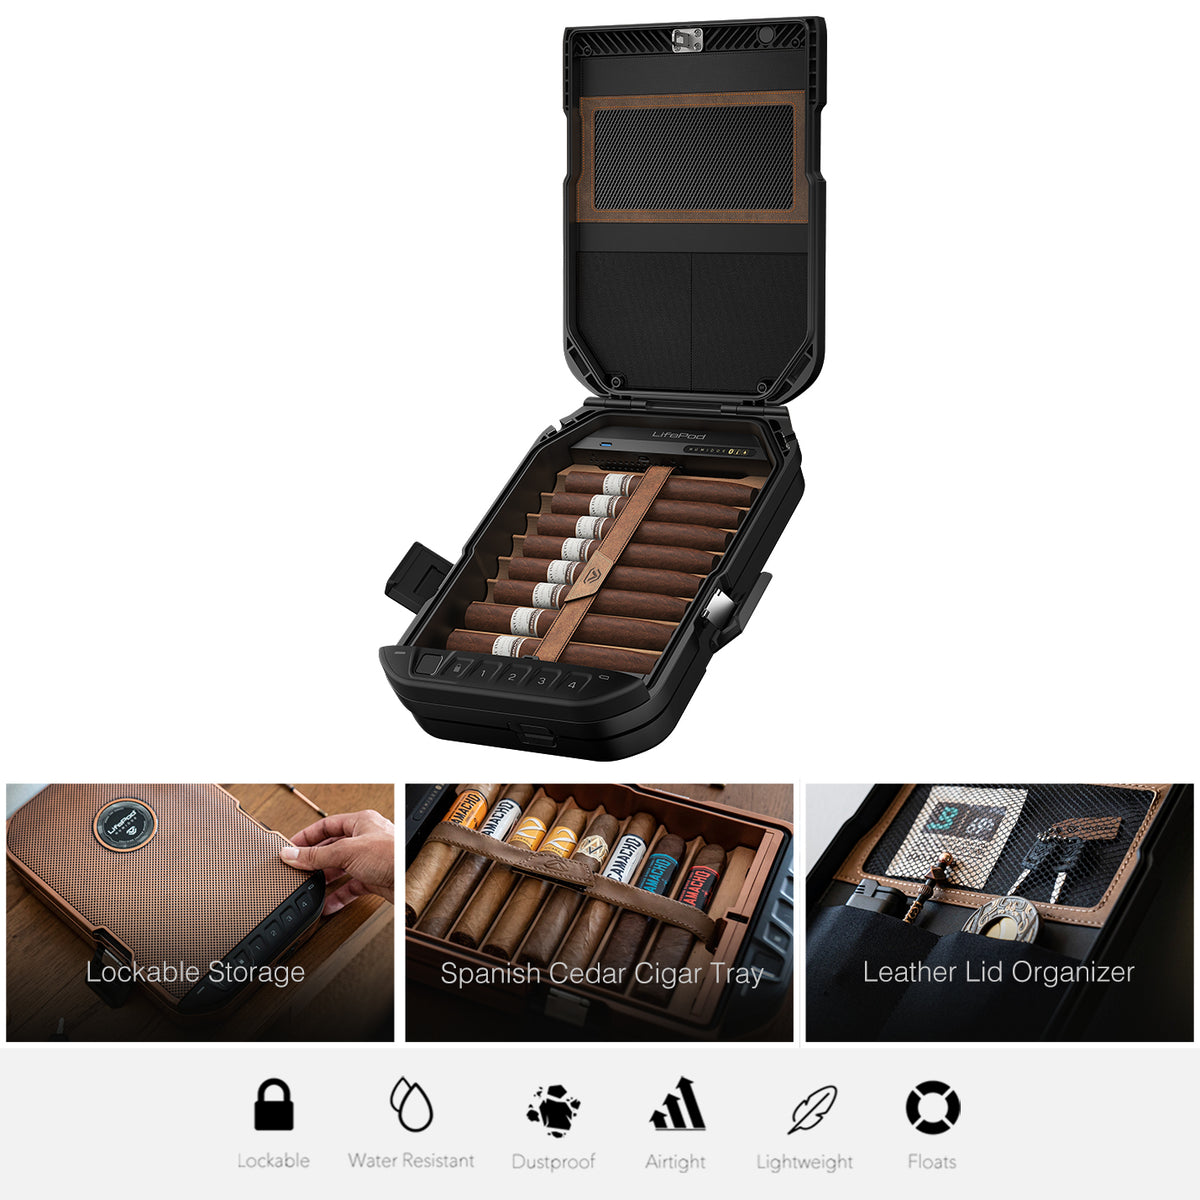 Vaultek - Weather Resistant LifePod 2.0 Humidor with Biometric Scanner, Bluetooth App, and Built-in Lock System